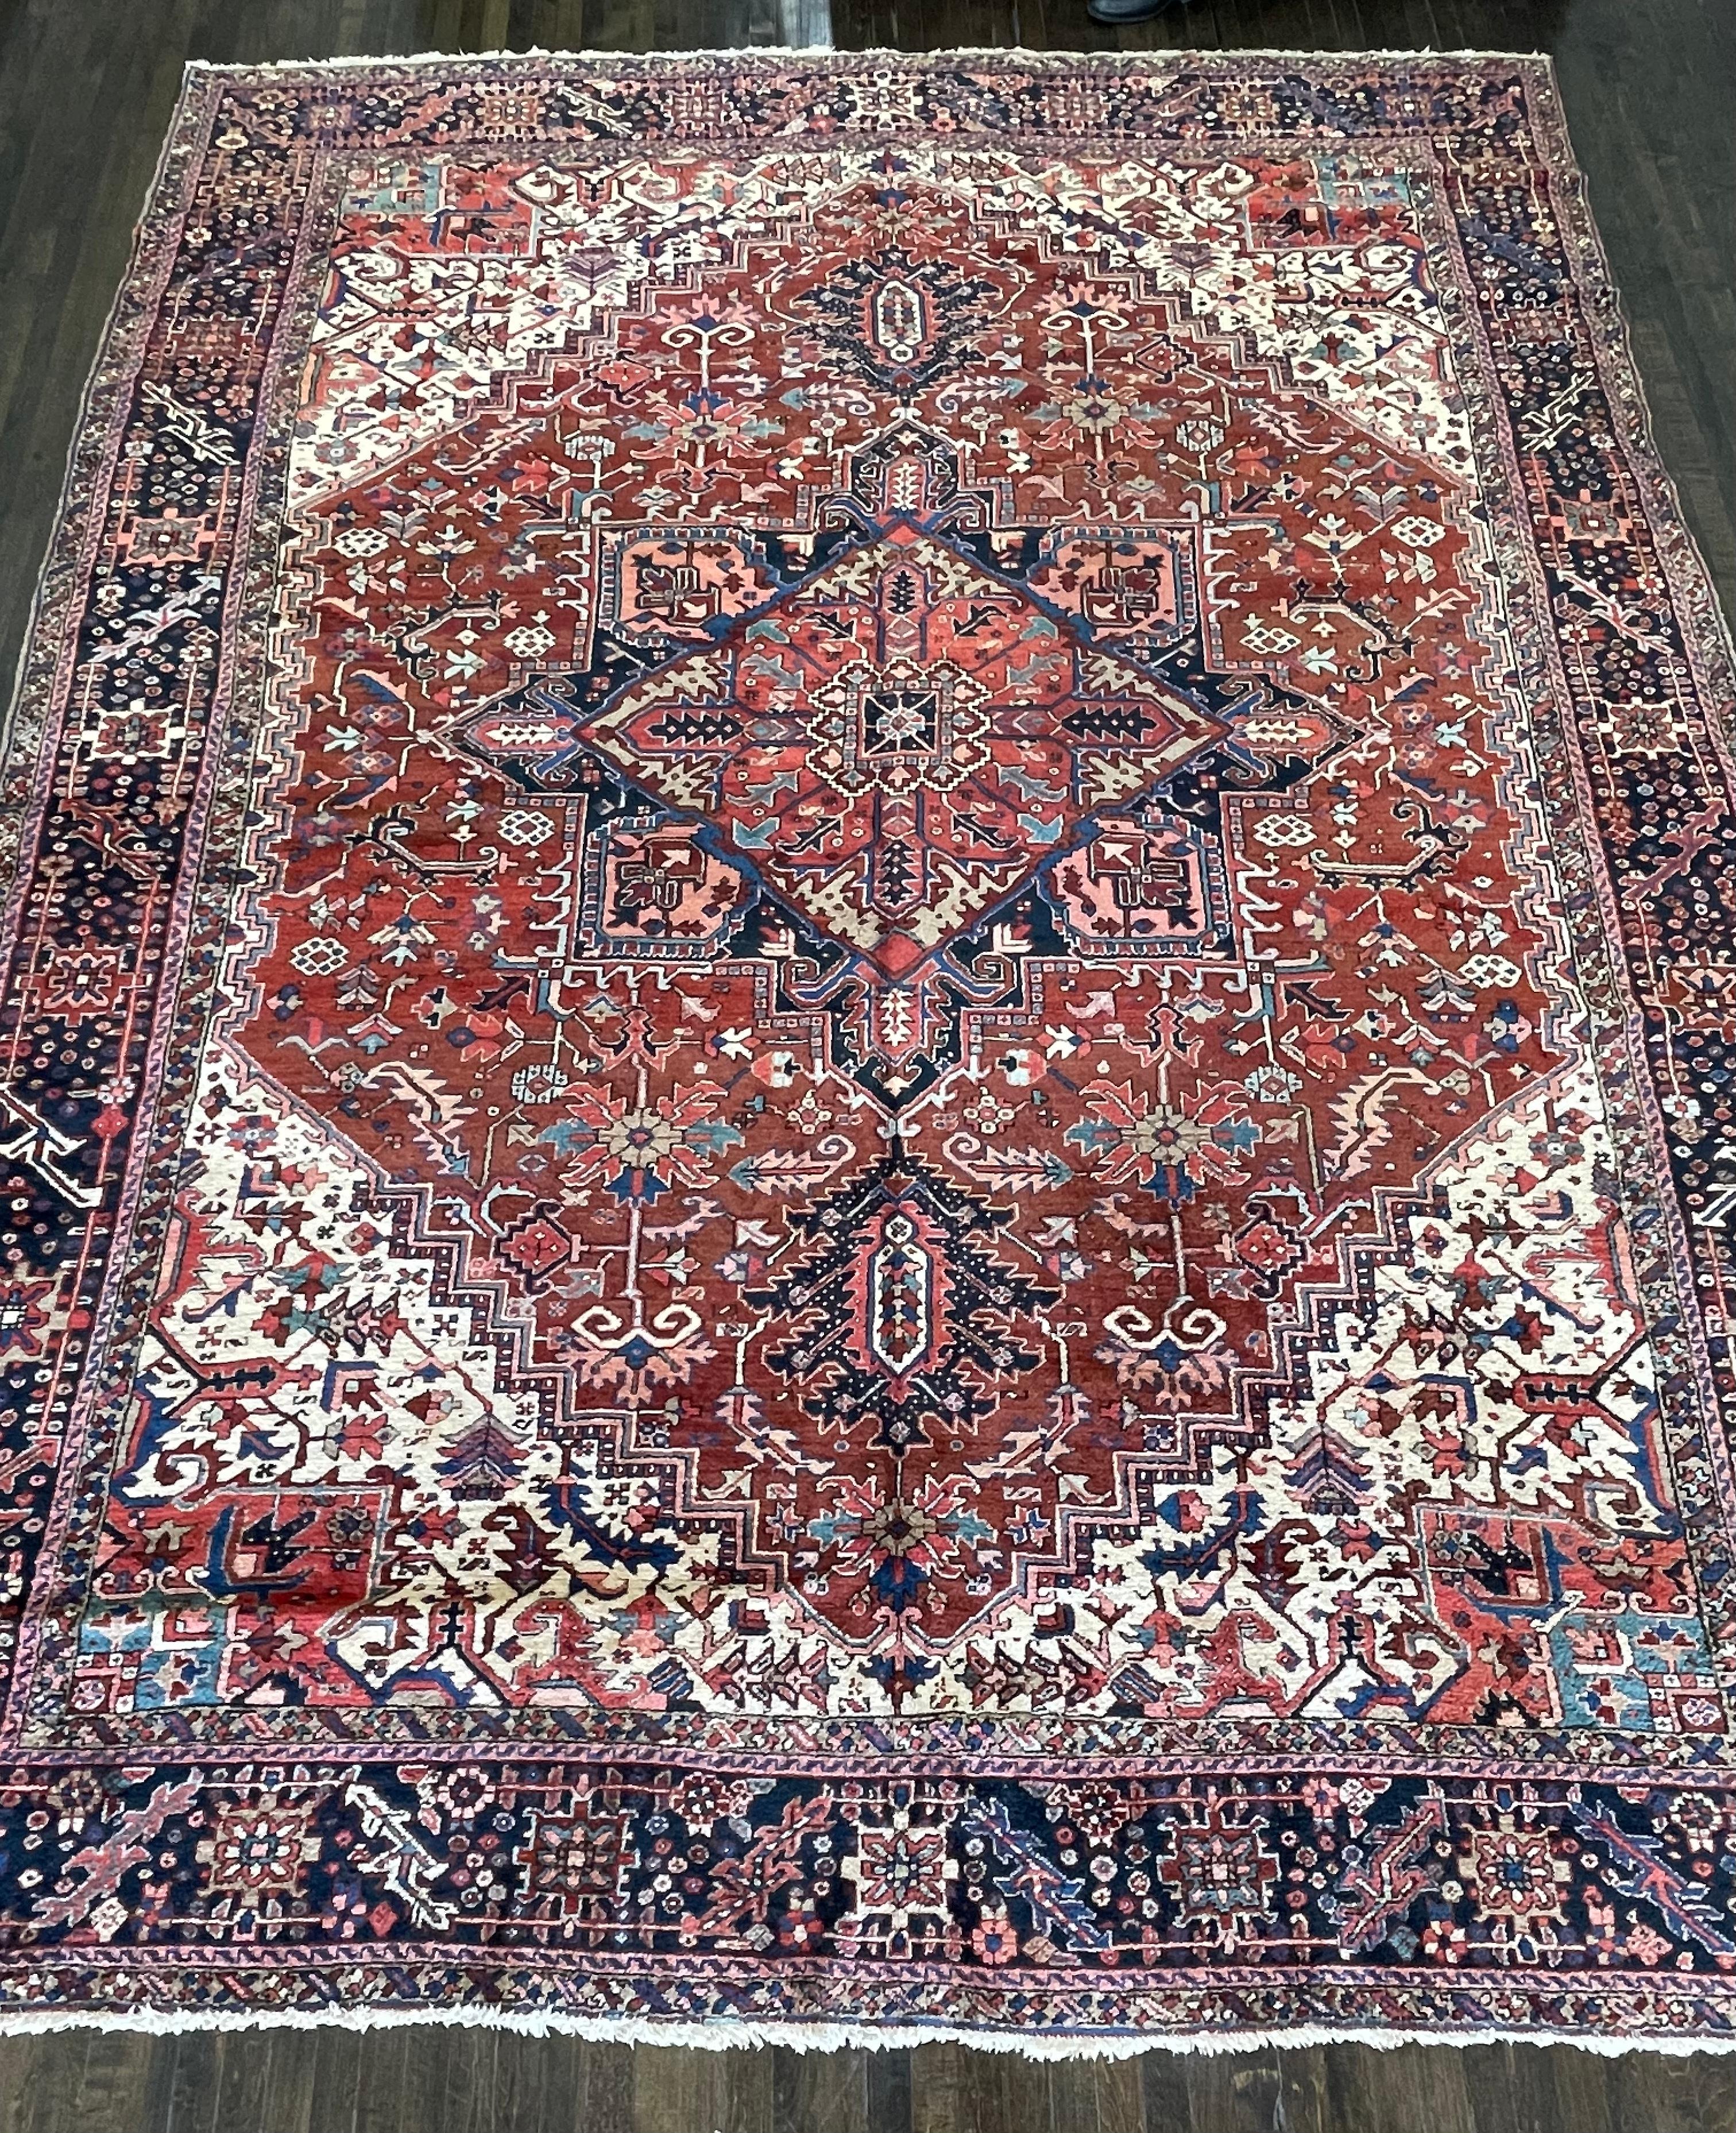 This carpet is handmade in the town of Heriz located northwest of Persia. The town of Heriz and its surrounding villages have formed one of the most prolific weaving centers in Persia for centuries.Heriz carpets have a cotton warp and double-cotton